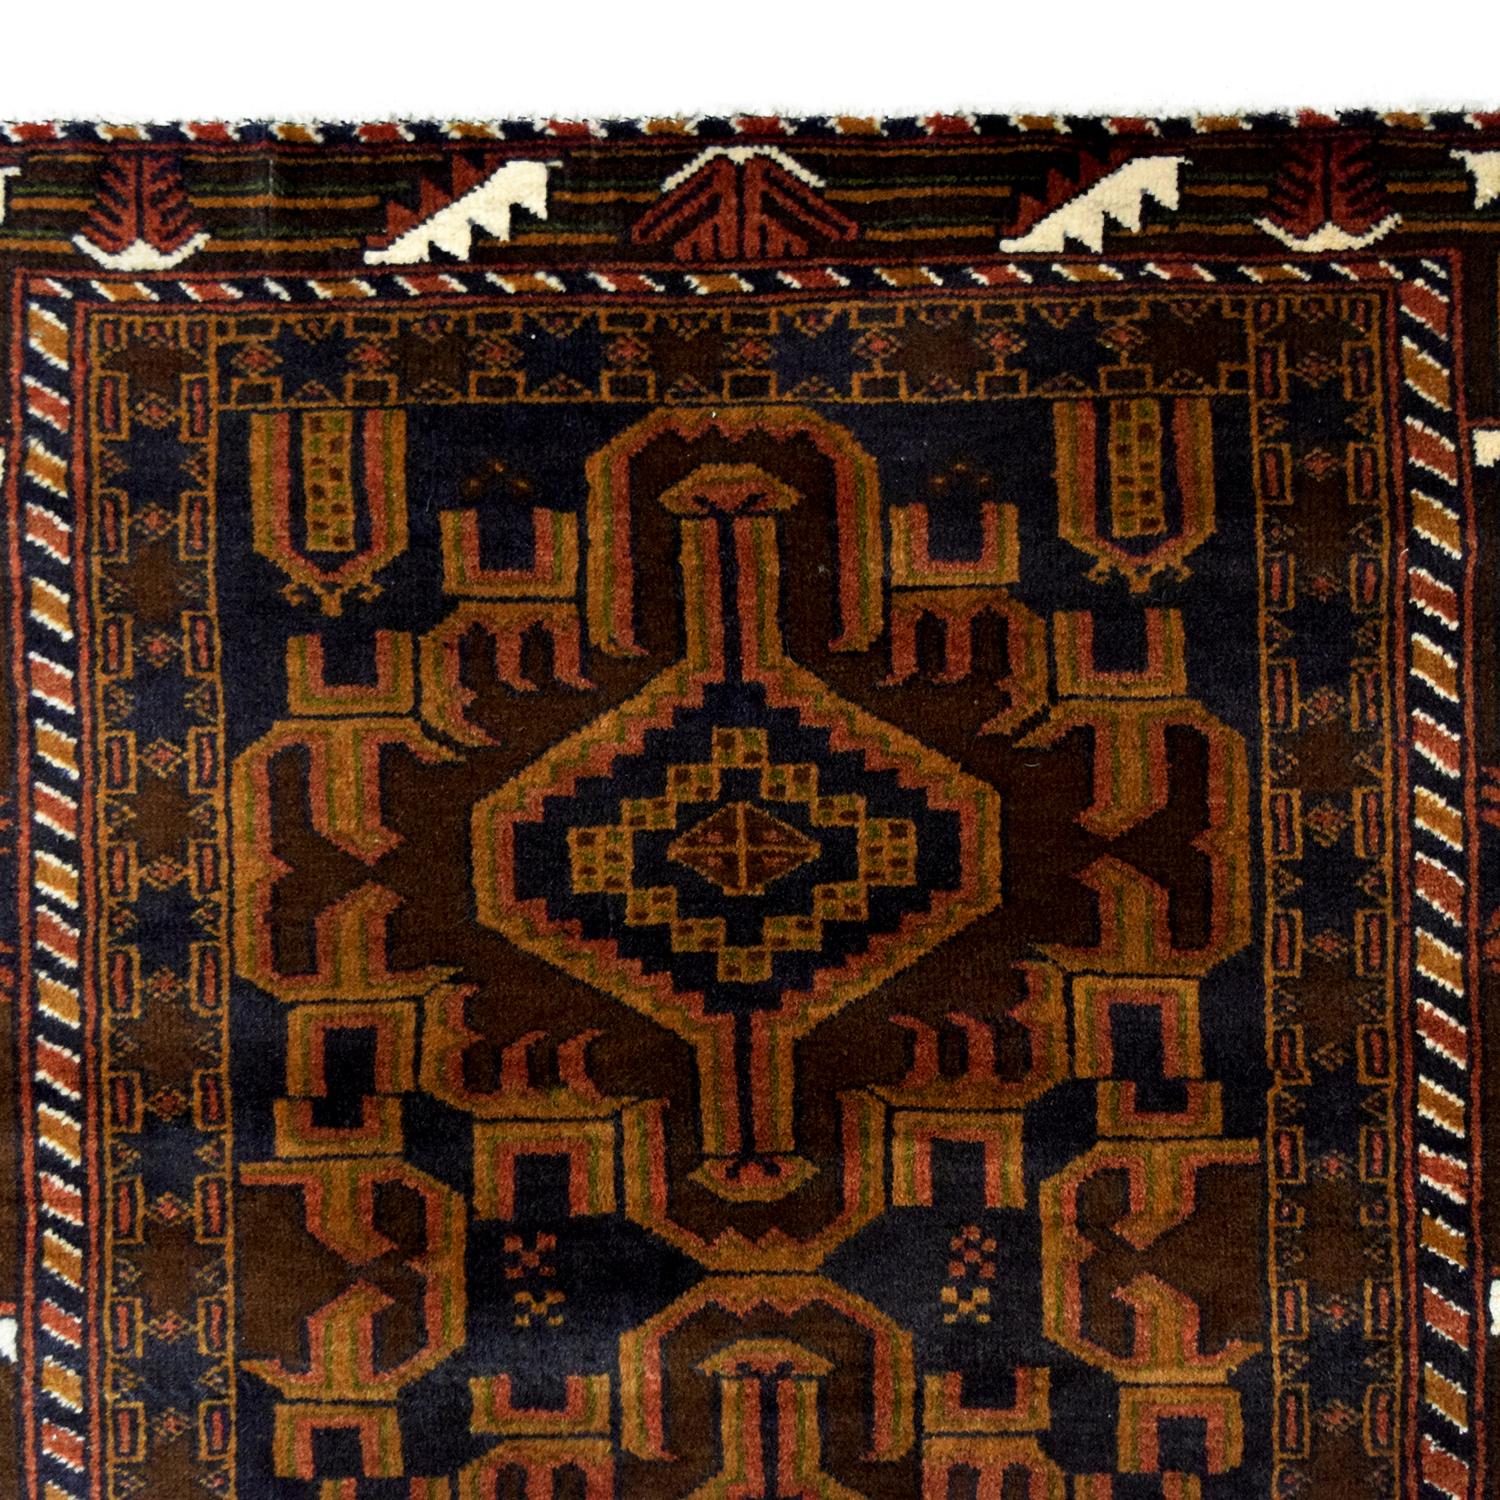 In rich shades of gold, black, red, and cream wool, this traditional Persian Balouchi carpet measures 3’ x 4’7”. Utilizing traditional Persian weaving techniques, this rug has an incredibly soft pile while also possessing superior durability from